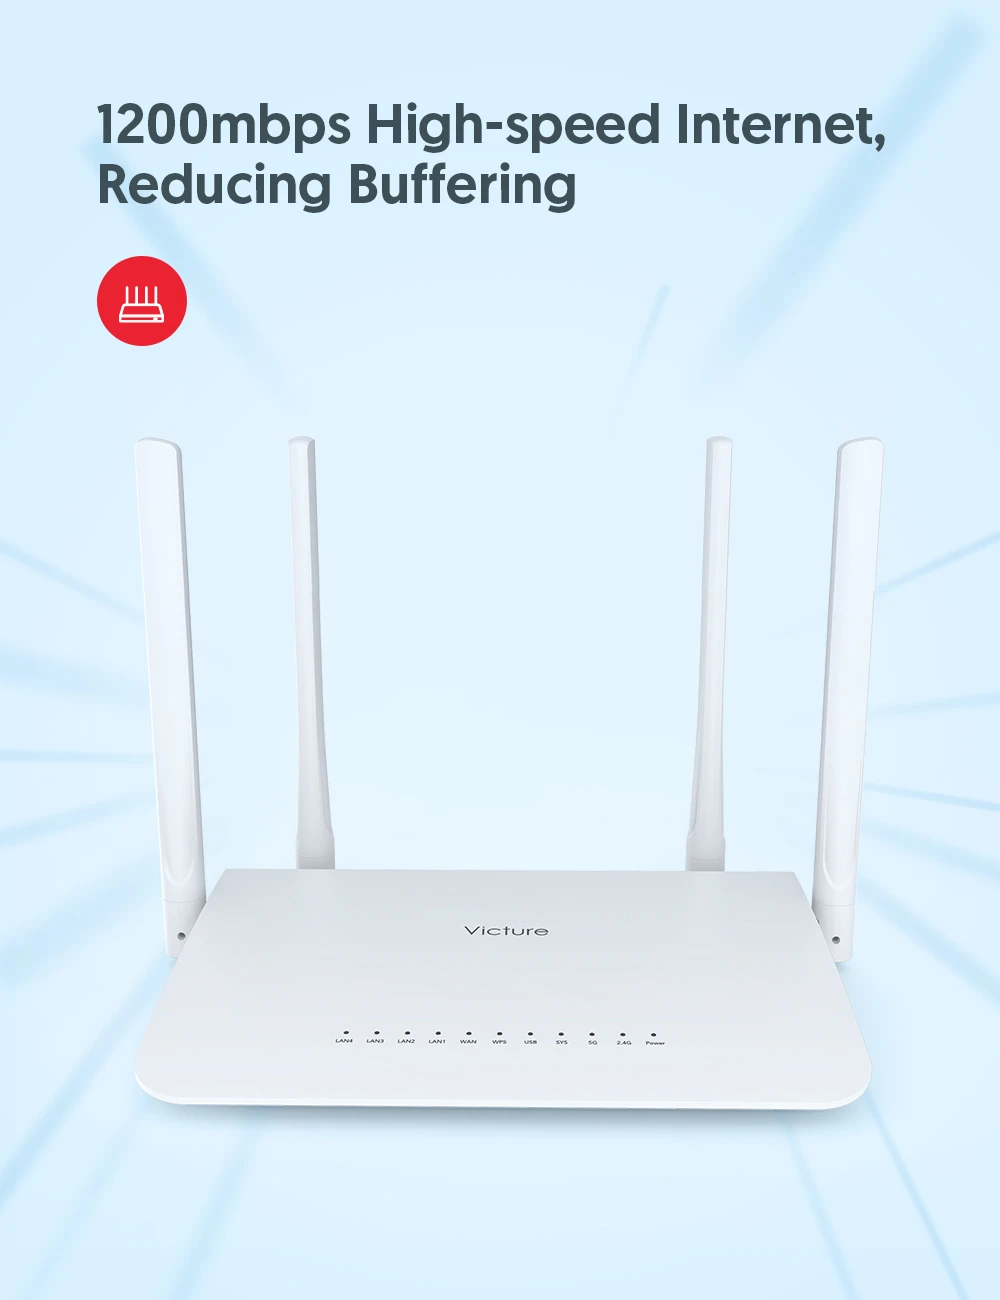 spectrum wifi extender WiFi Router AC1200 for Home, Wireless Router, Dual Band WiFi Router with 4 Gigabit LAN Ports, Coverage up to 3500 sqft, Supports best modem router combos for gaming